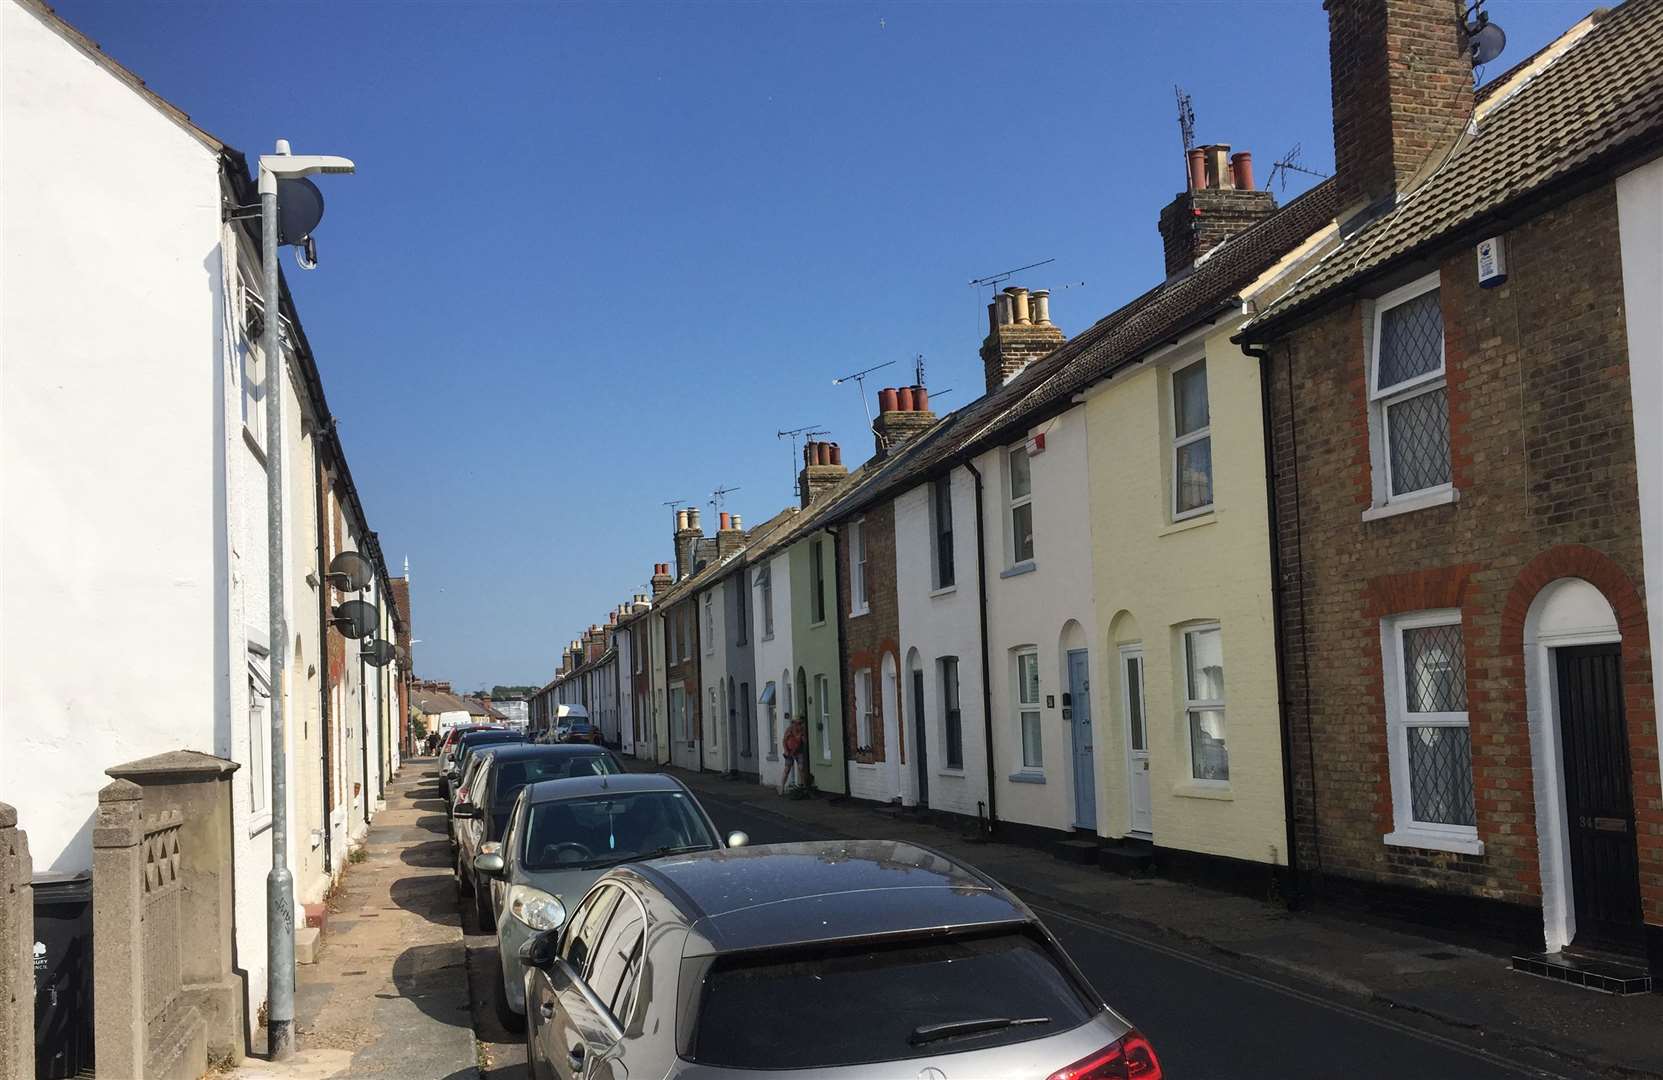 There have long been concerns about the impact of holiday lets and second homes on areas like Whitstable